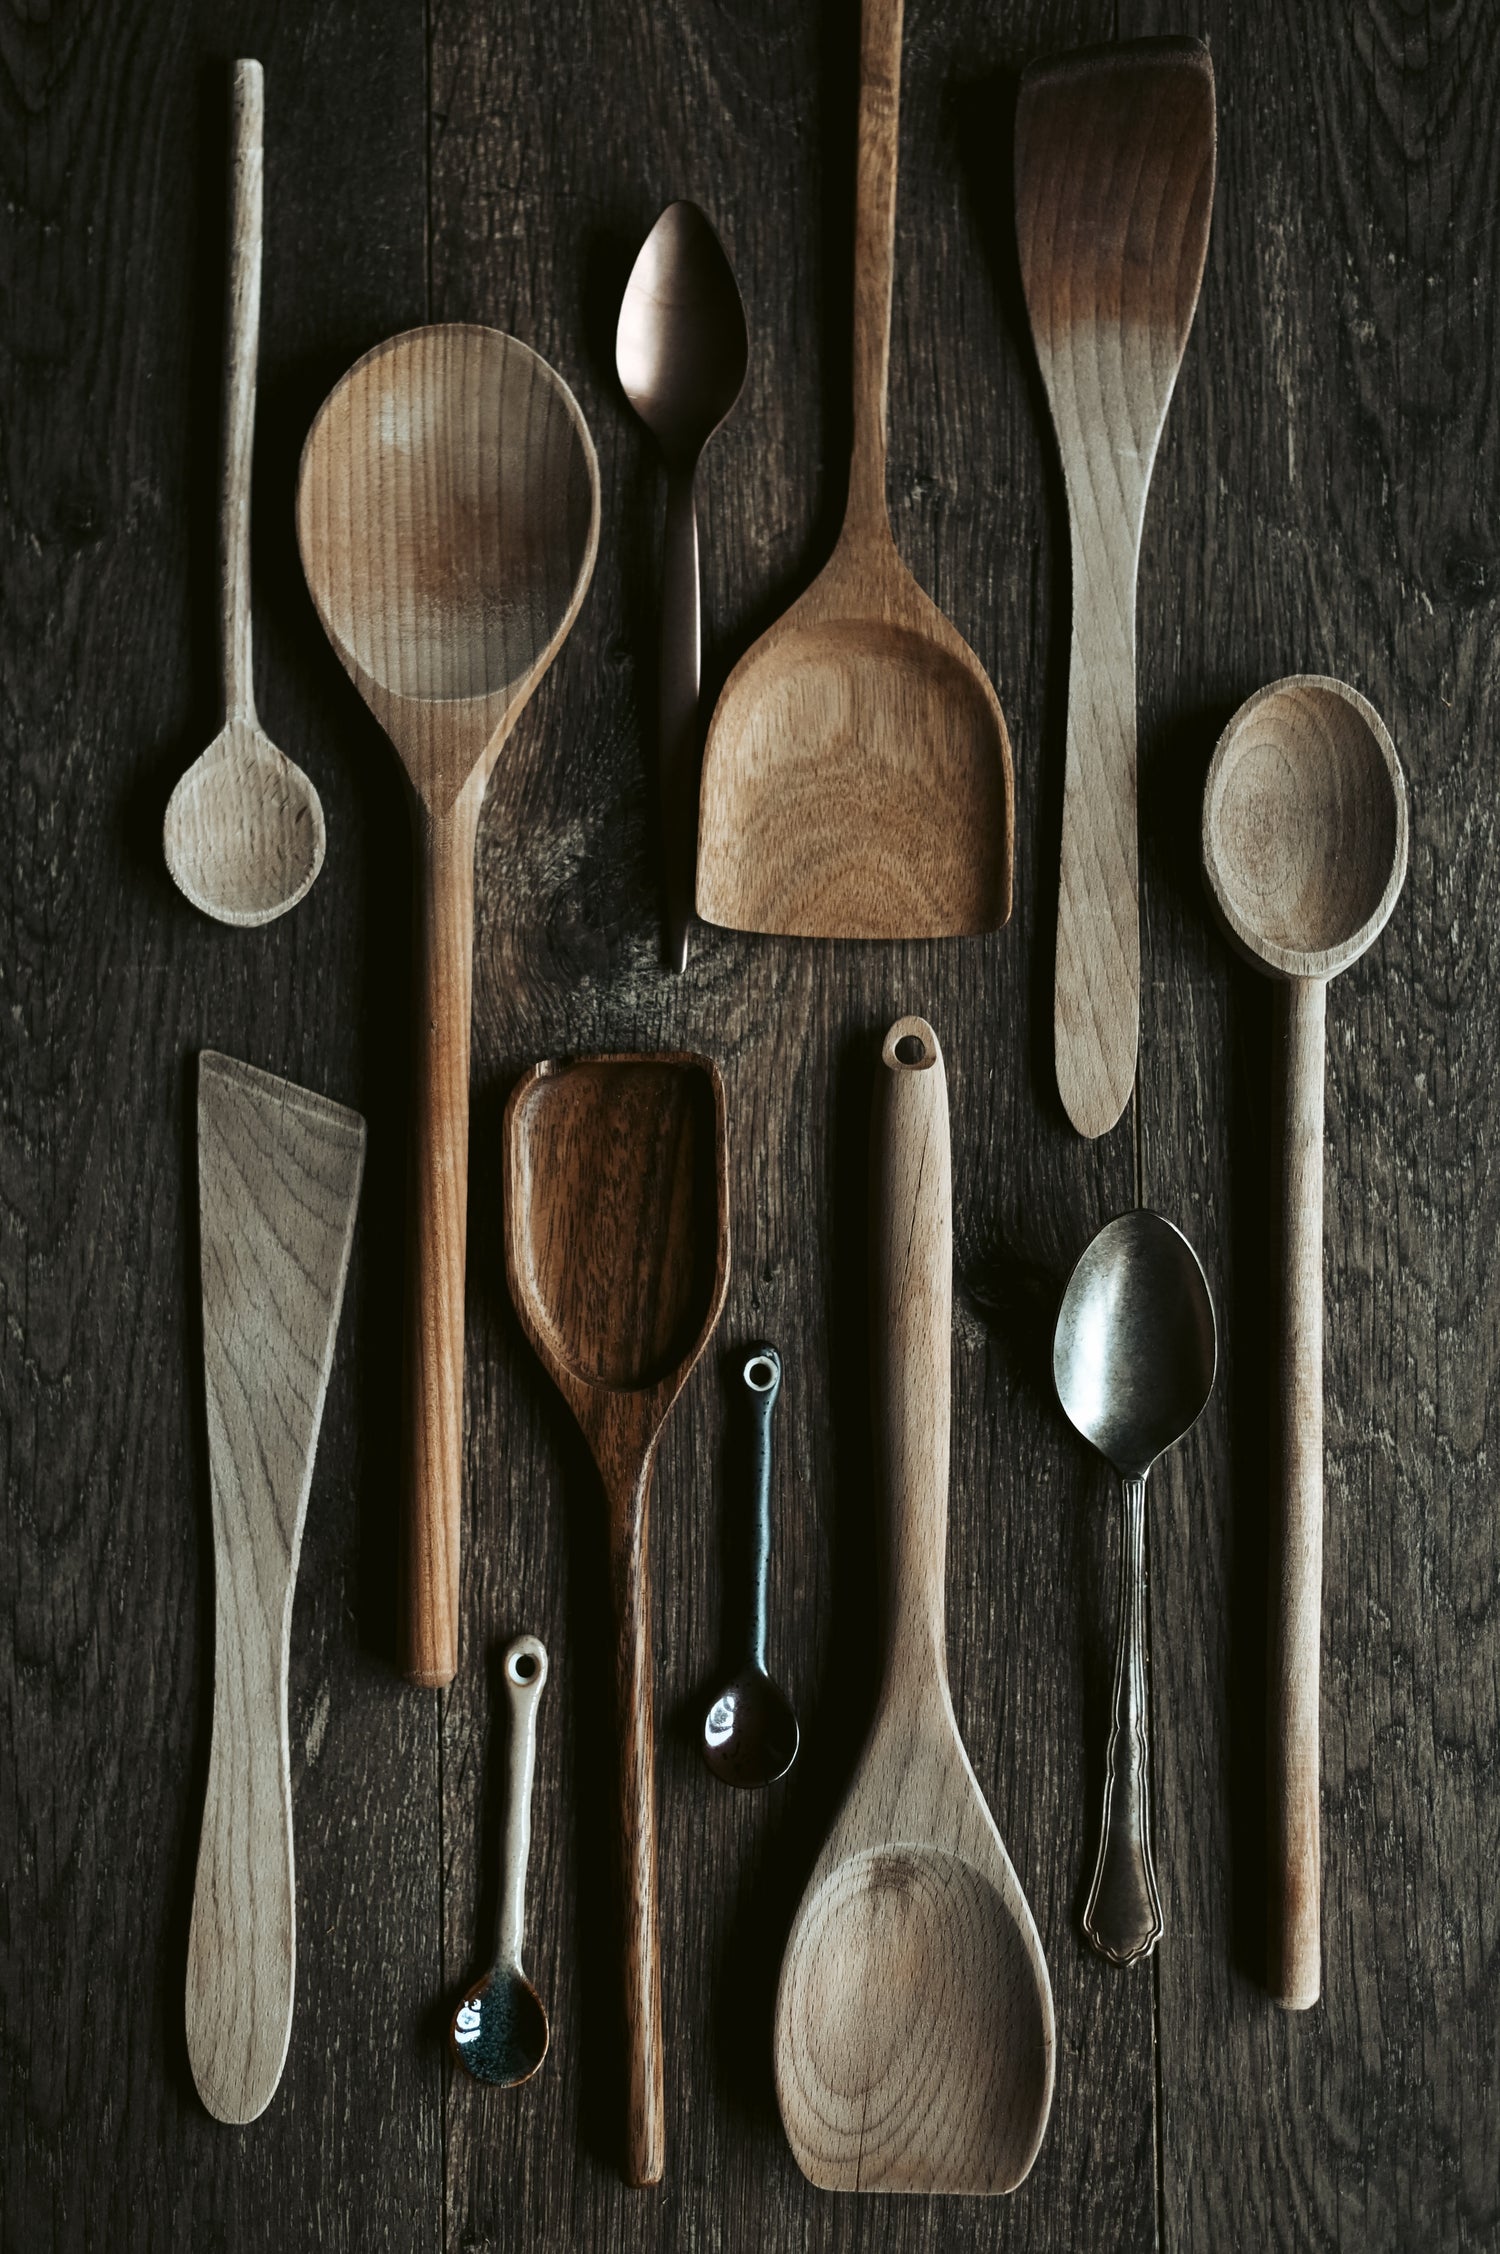 Large Wooden Cooking Spoons (Assorted Sets)